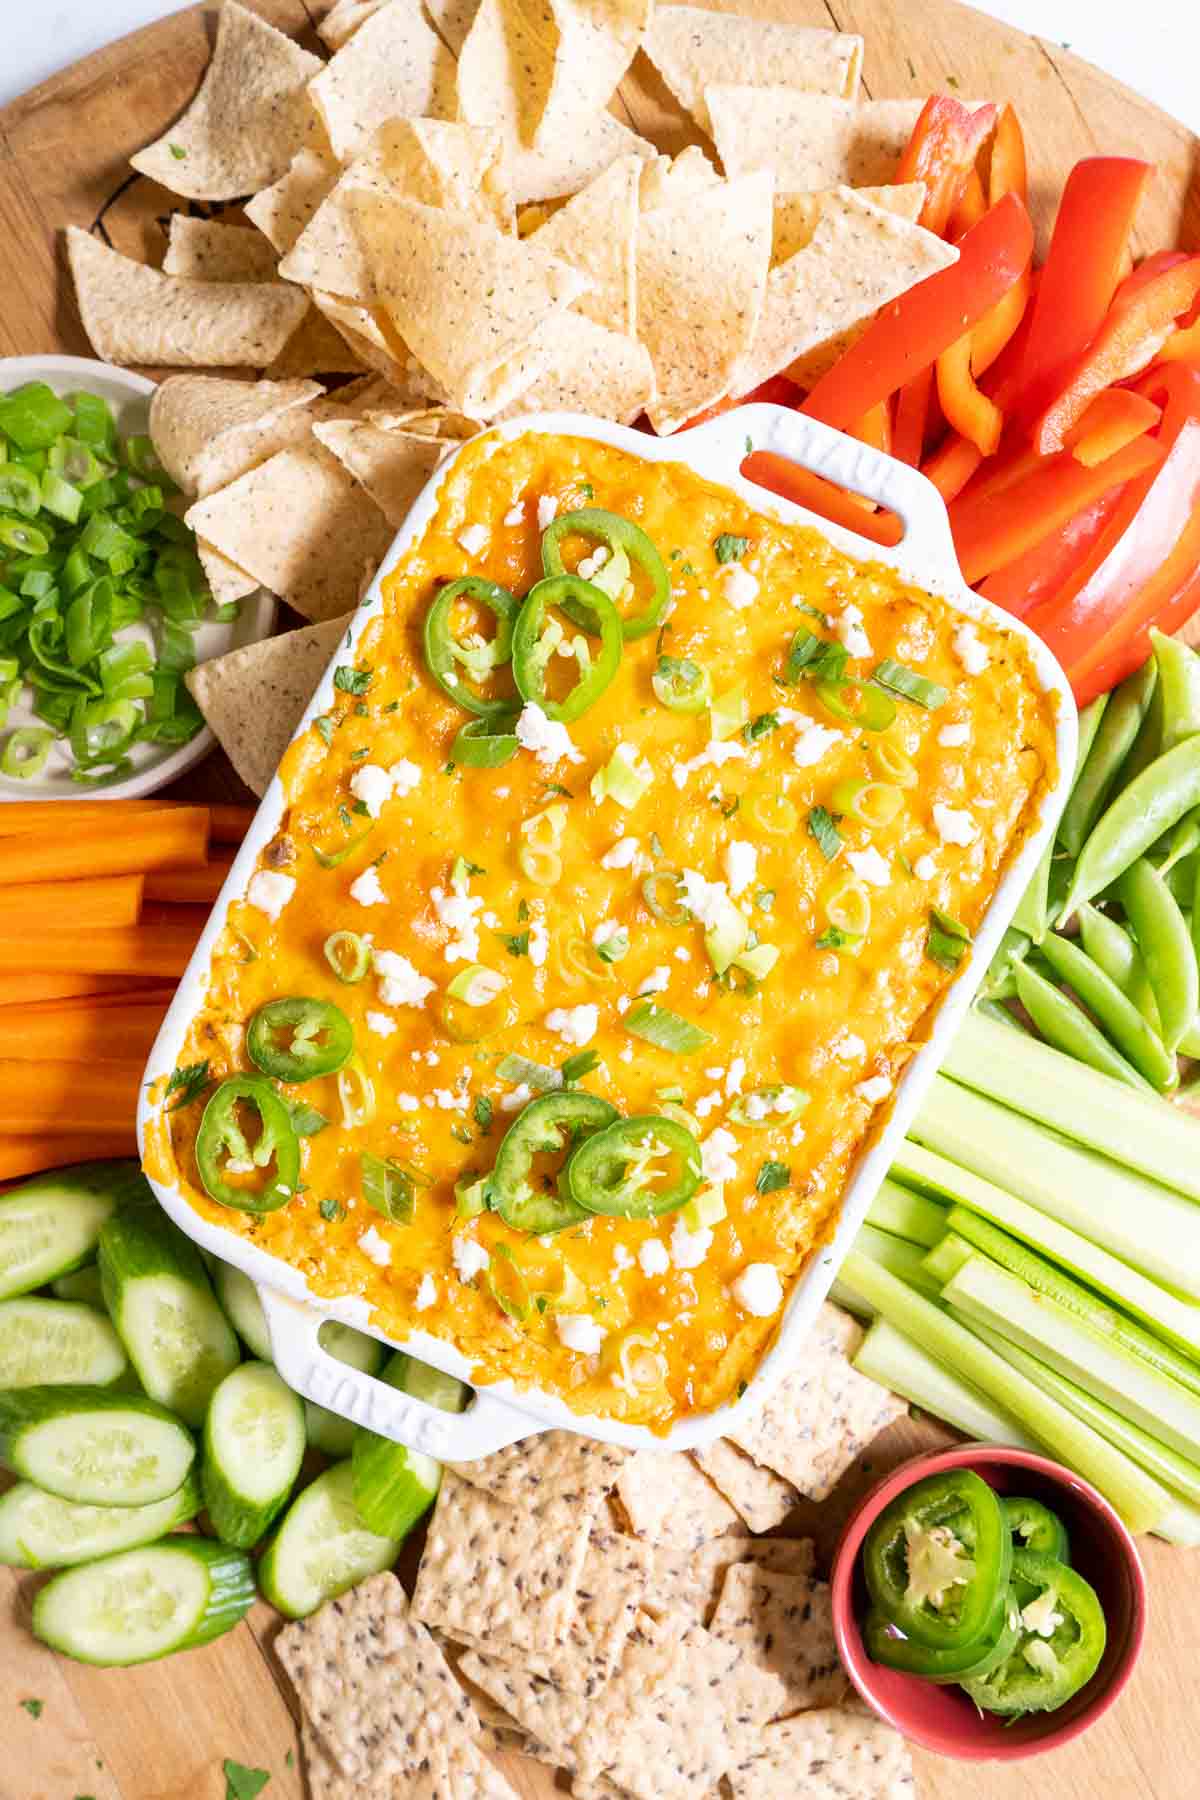 Buffalo chicken dip baked in a white dish. Served with crackers and veggies.